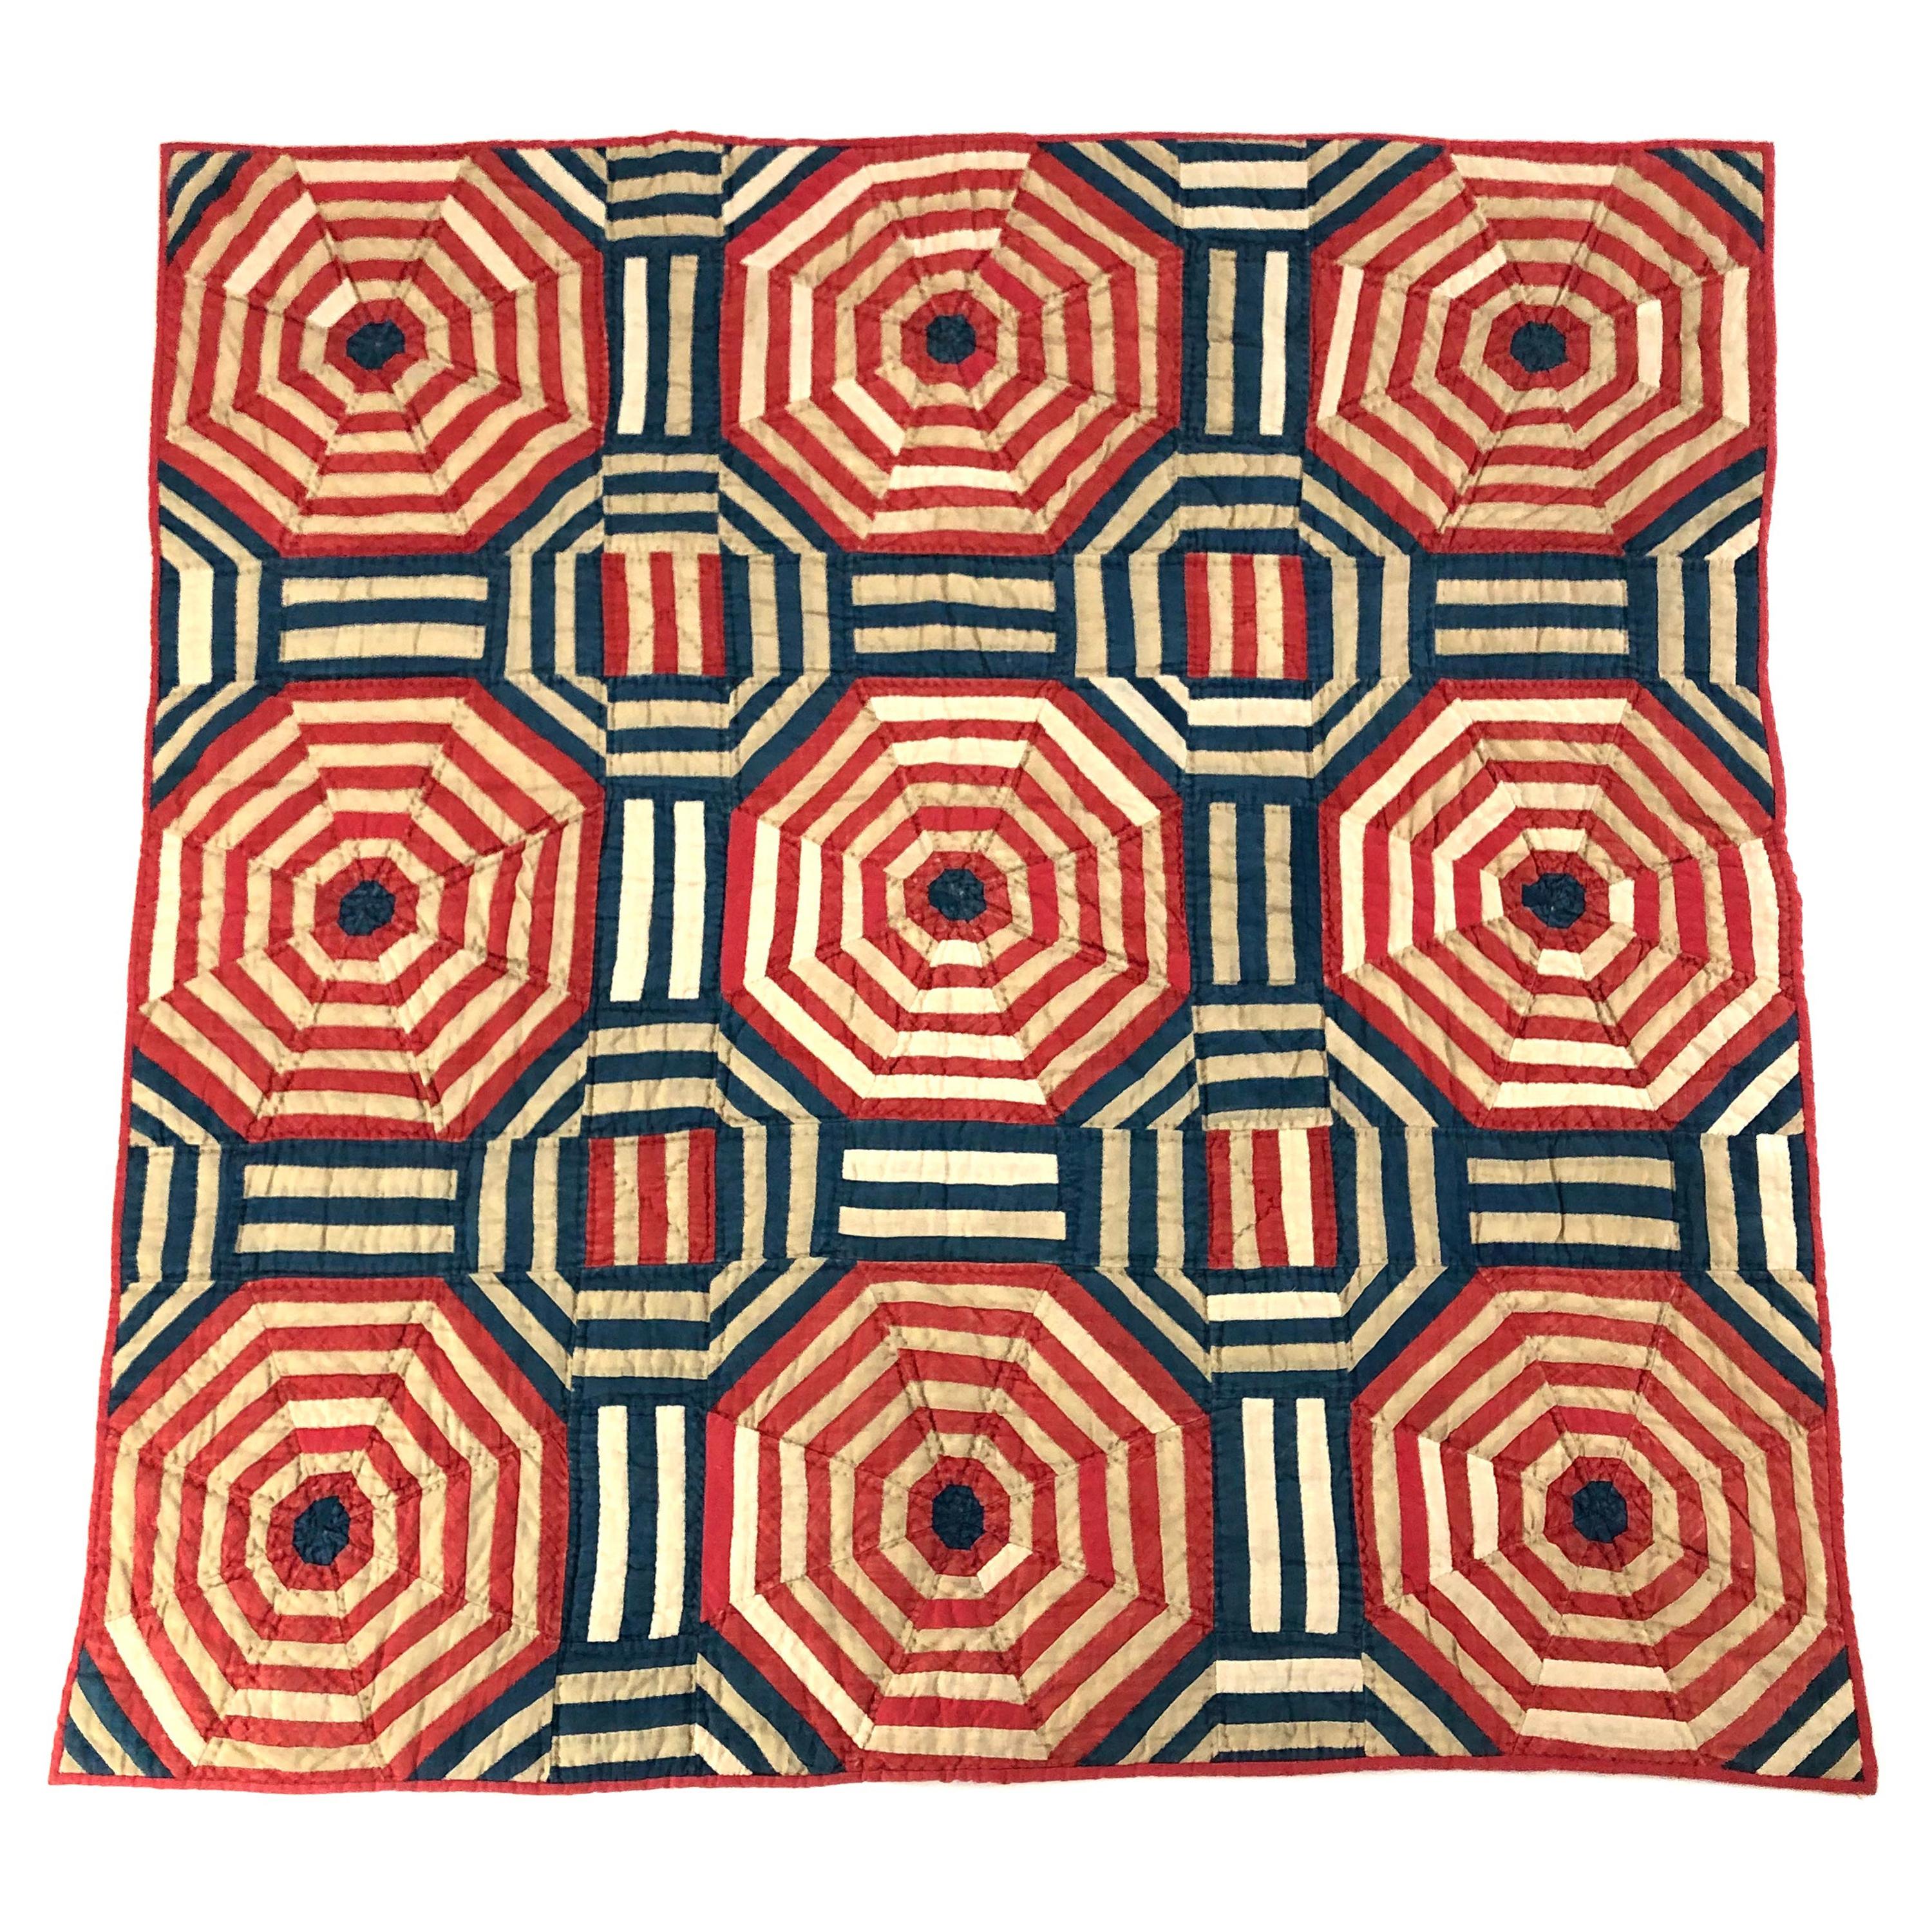 American Folk Art Red White and Blue Geometric Crib Quilt Wall Hanging, c. 1876